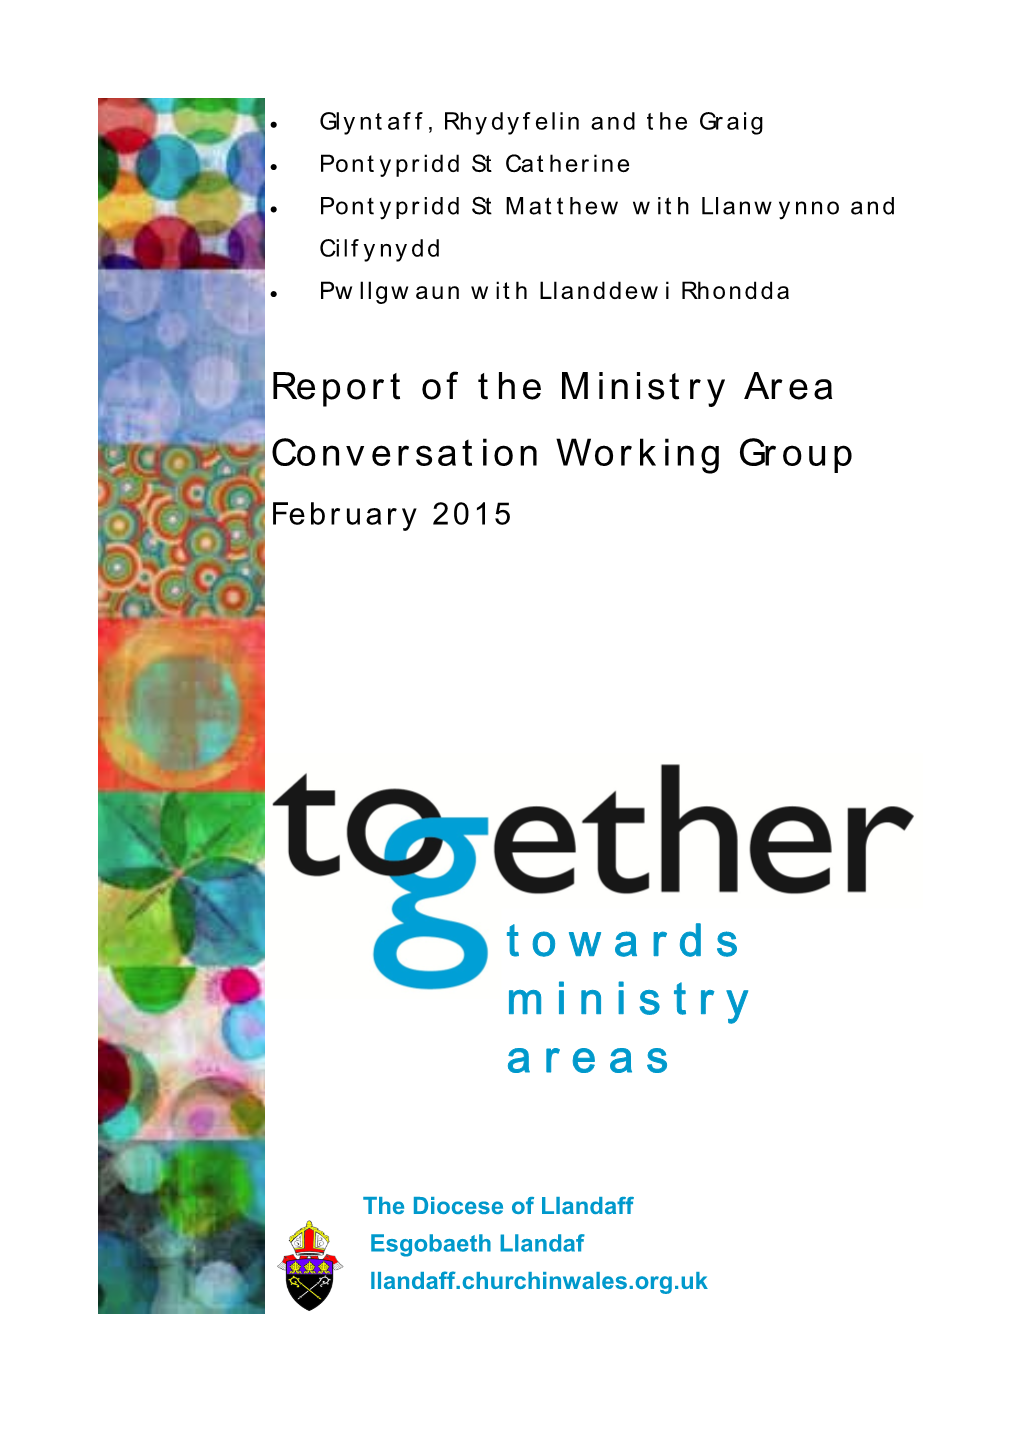 Towards Ministry Areas